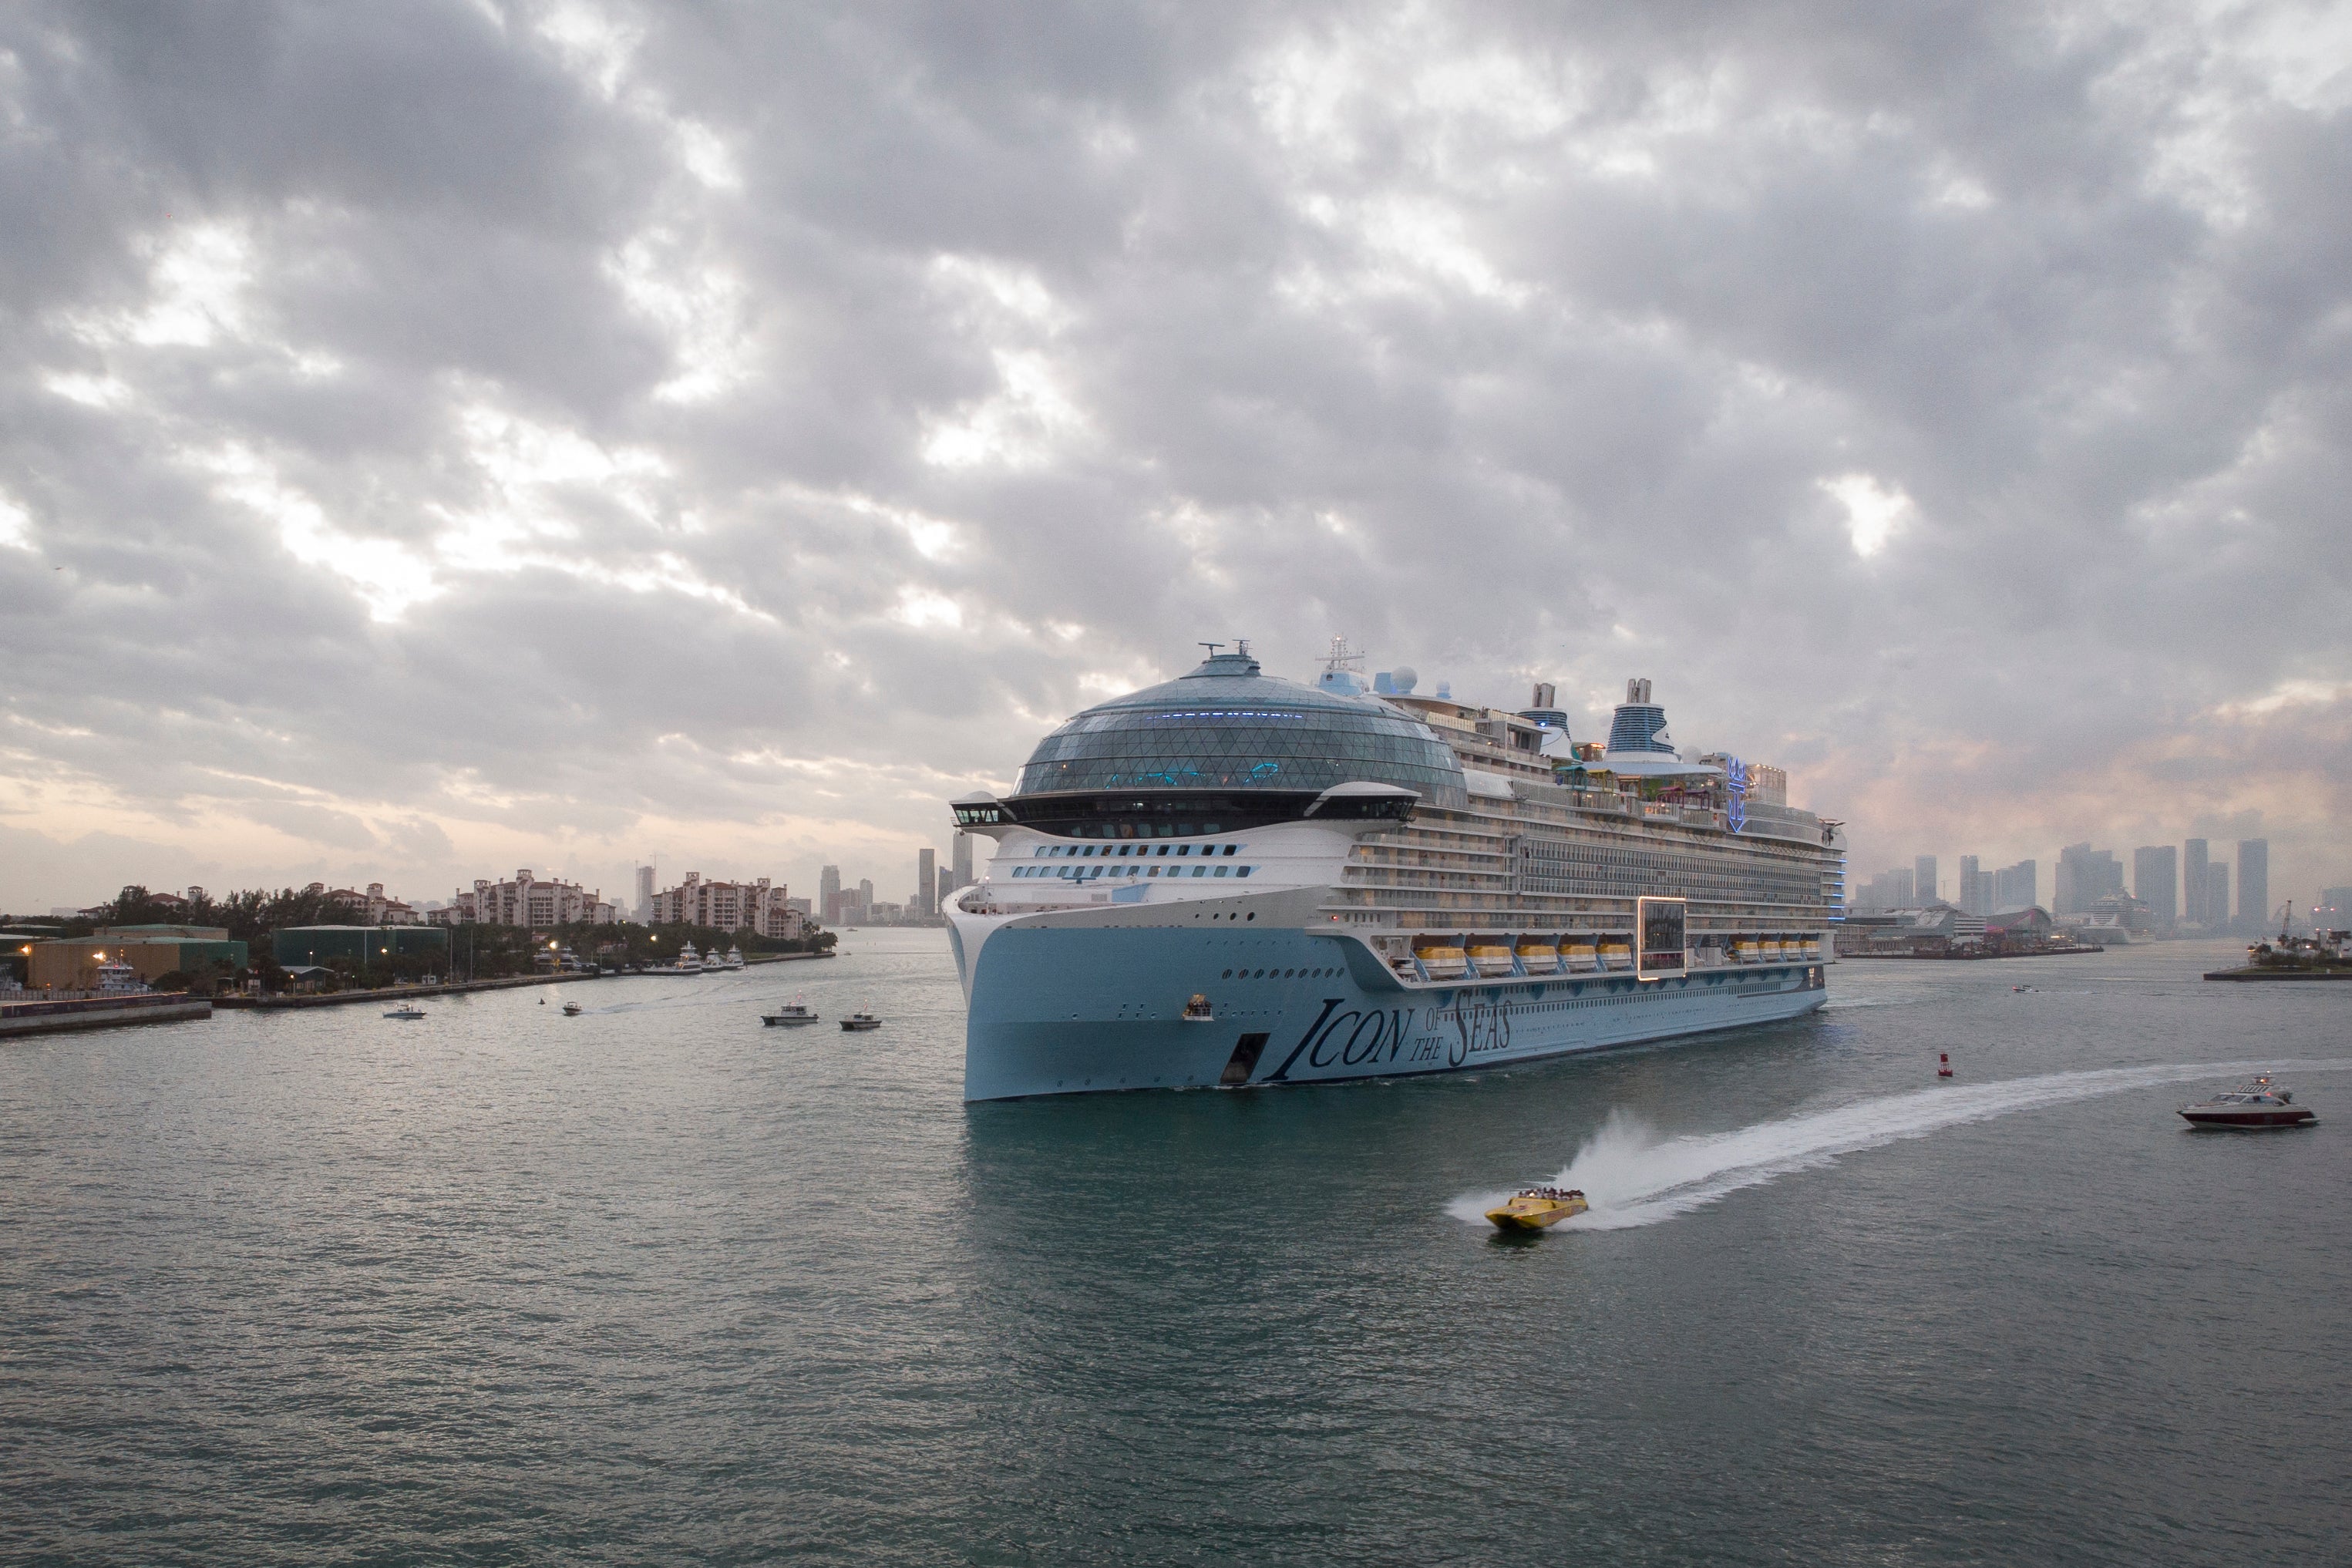 The incident occurred on the Icon of the Seas, a 1,196ft-long and 20-deck high cruise ship